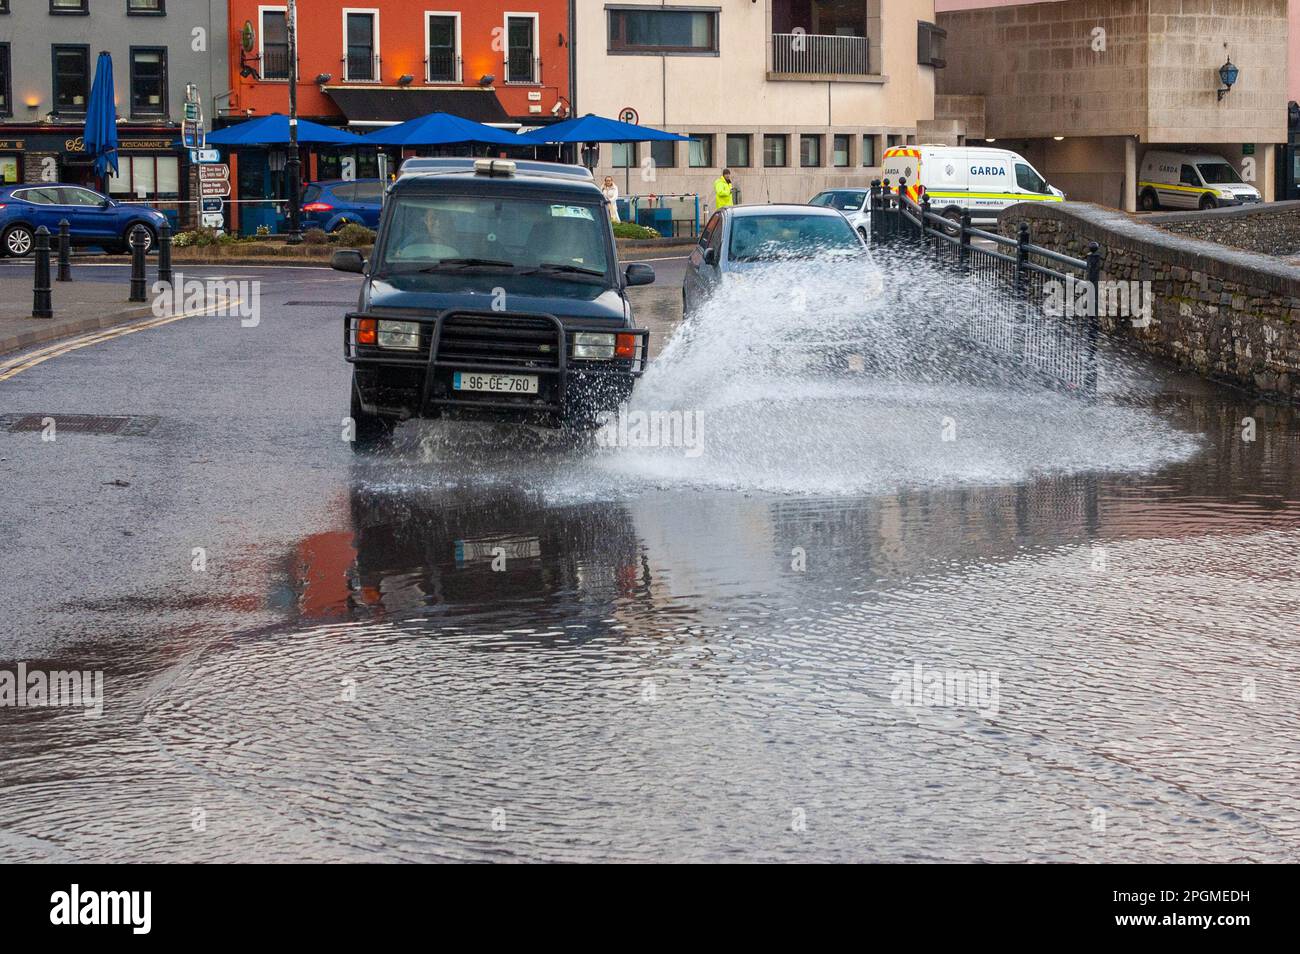 Bantry West Cork Ireland Thursday 23 Mar 2023; Bantry Experienced mild flooding this evening. High tide hit at 6.05pm with spot flooding in places. Cork County Council staff where out dealing with the major waterlogged areas as well as traffic managment. Credit; ED/Alamy Live News Stock Photo